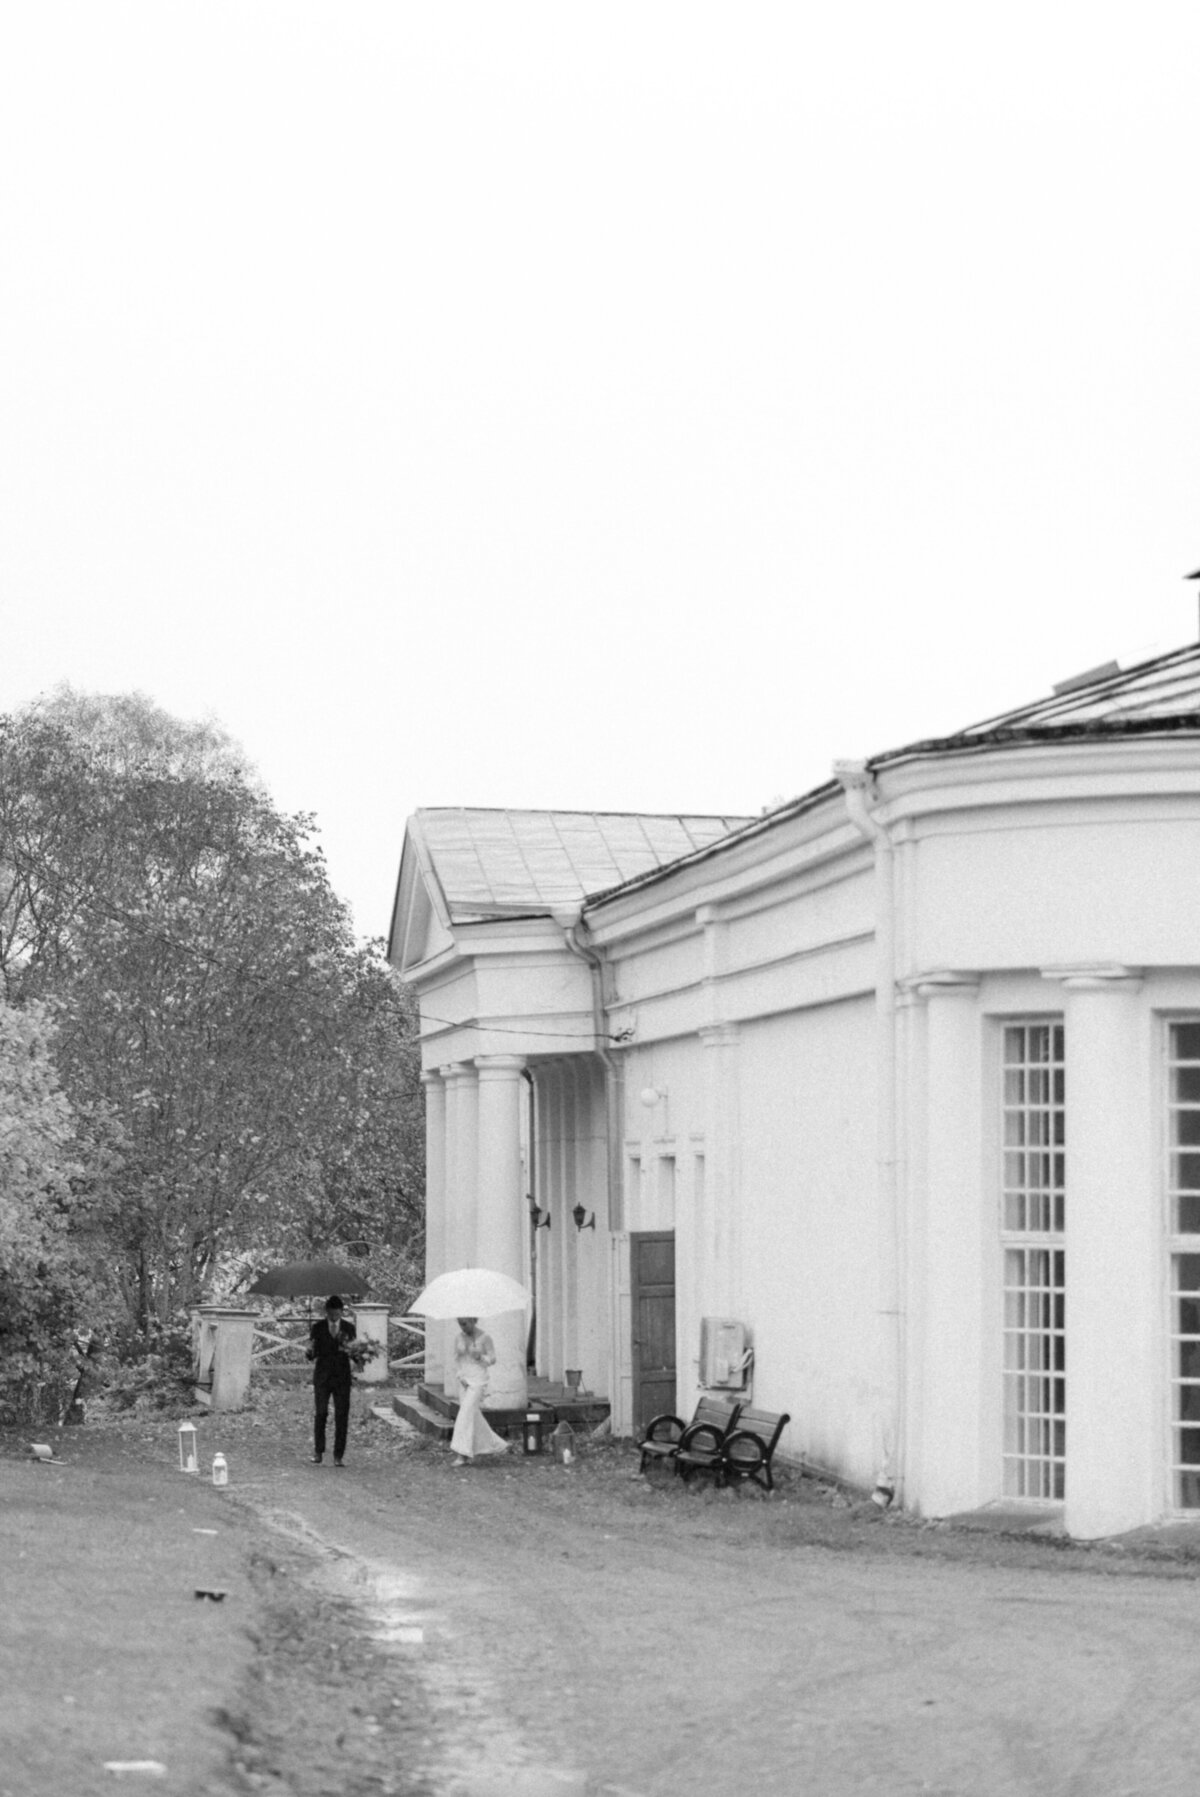 A documentary photograph of a wedding couple coming out of the orangerie with umberellas in Oitbacka gård captured by wedding photographer Hannika Gabrielsson in Finland